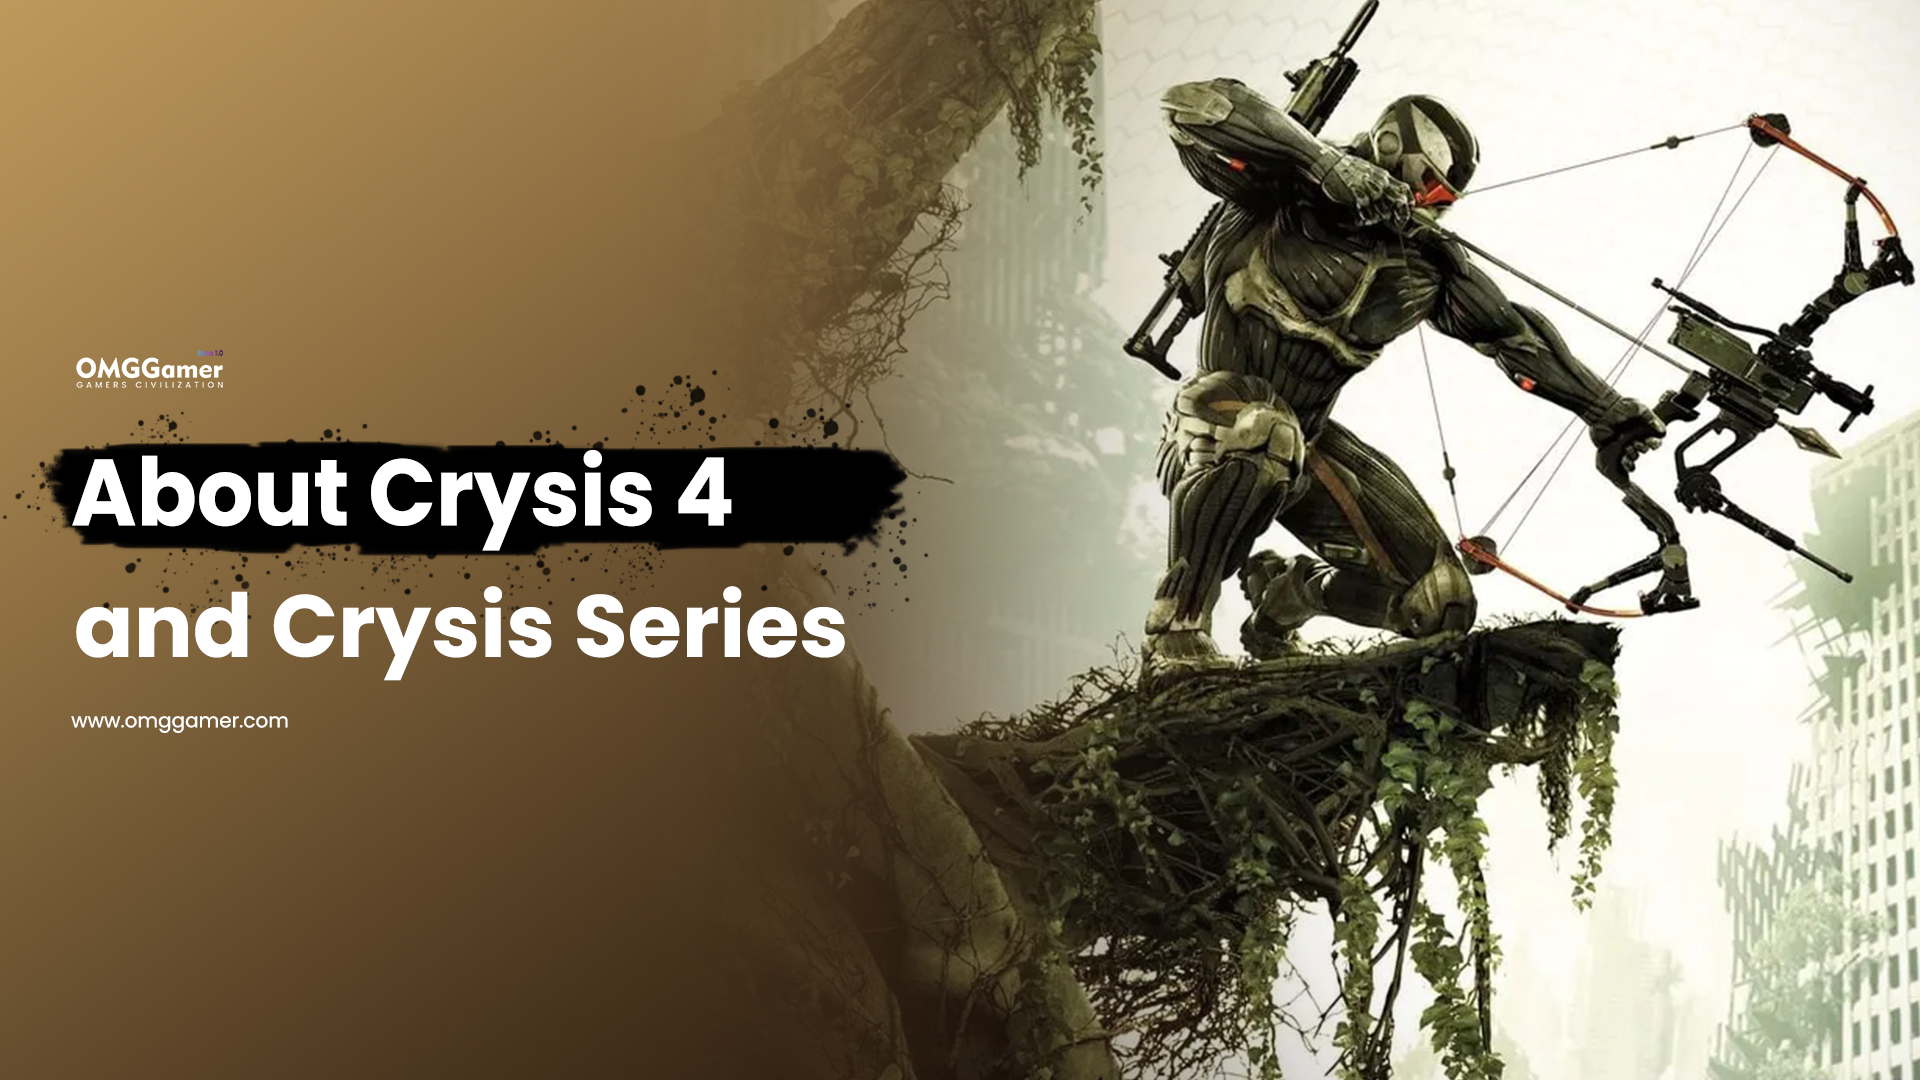 About Crysis 4 and Crysis Series